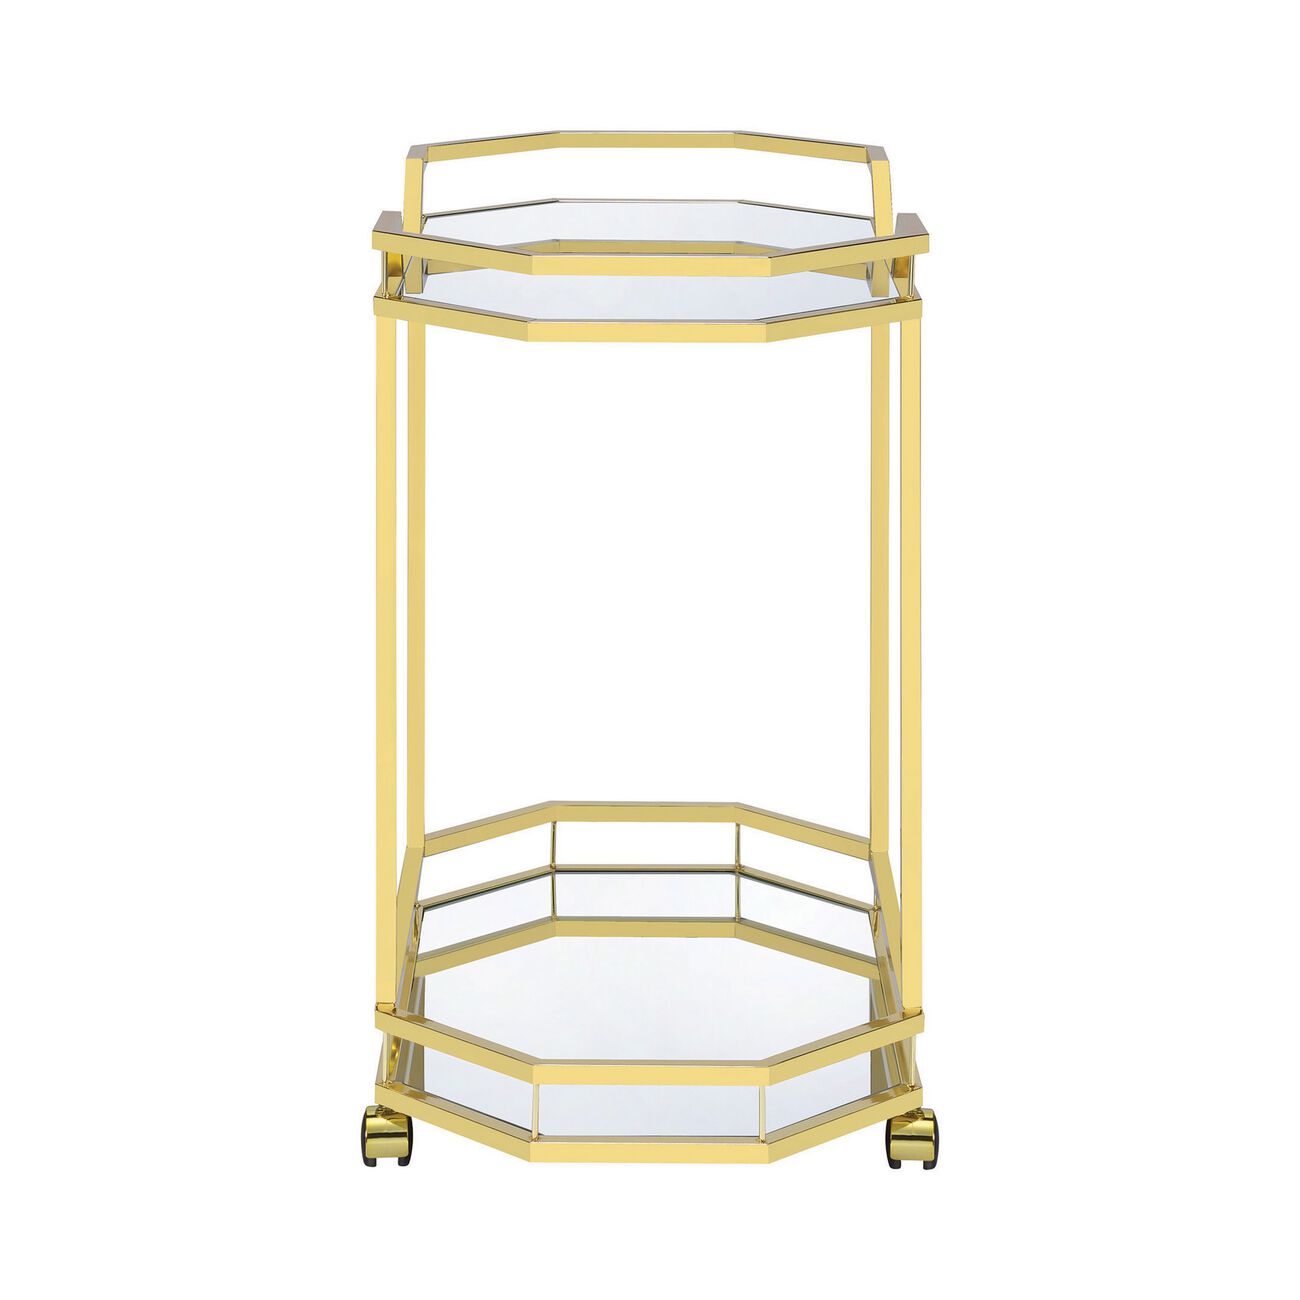 2 Tier Geometric Metal Serving Cart with Mirror Shelves, Gold